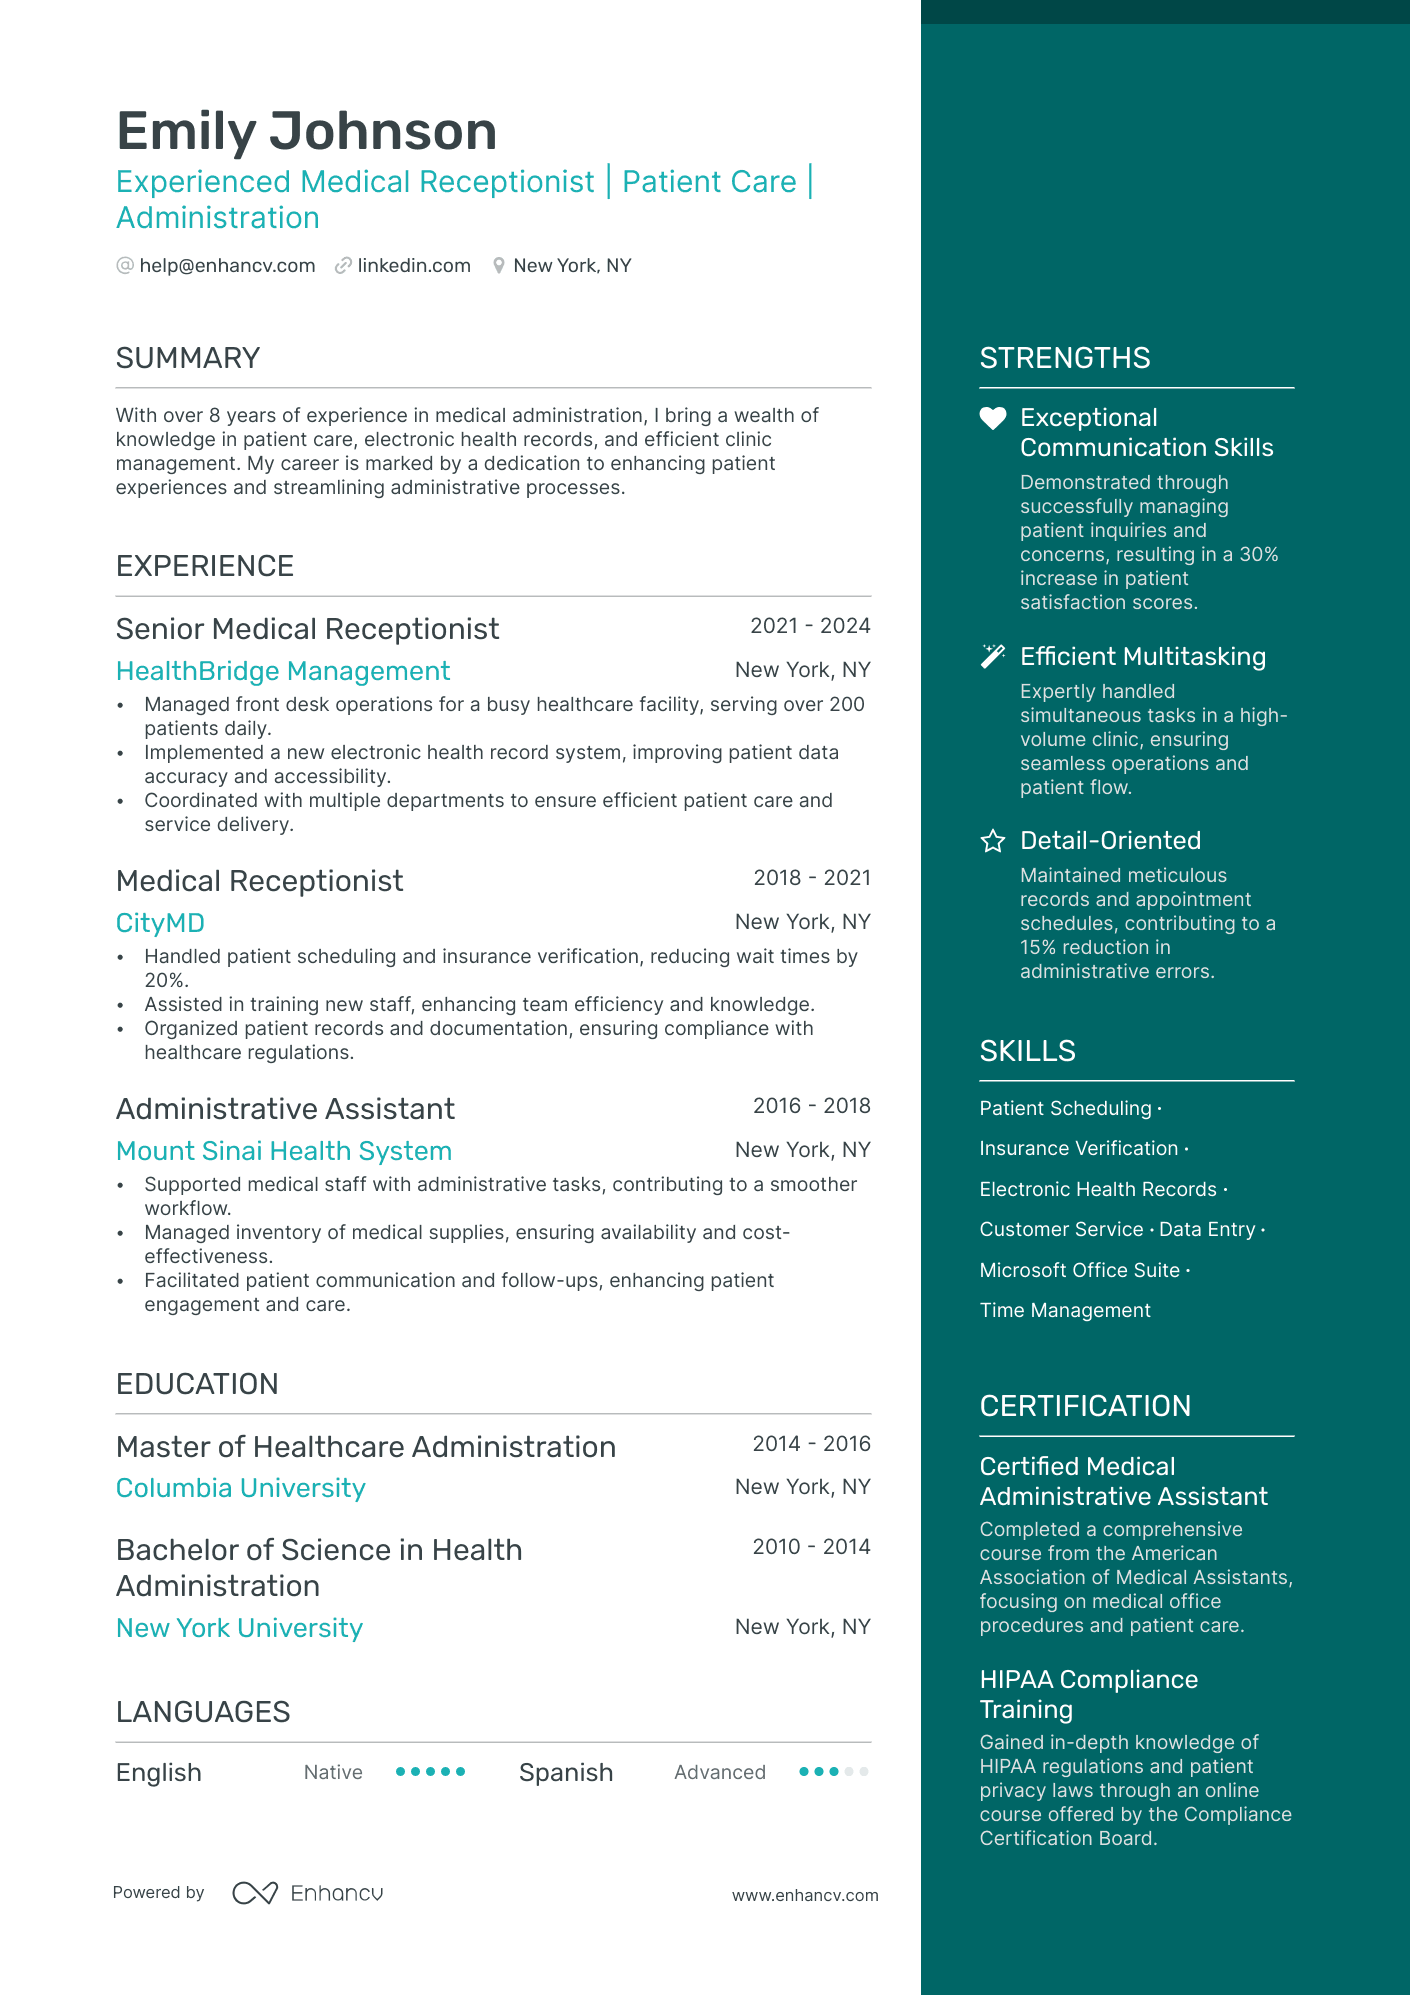 Experienced Medical Receptionist | Patient Care | Administration resume example